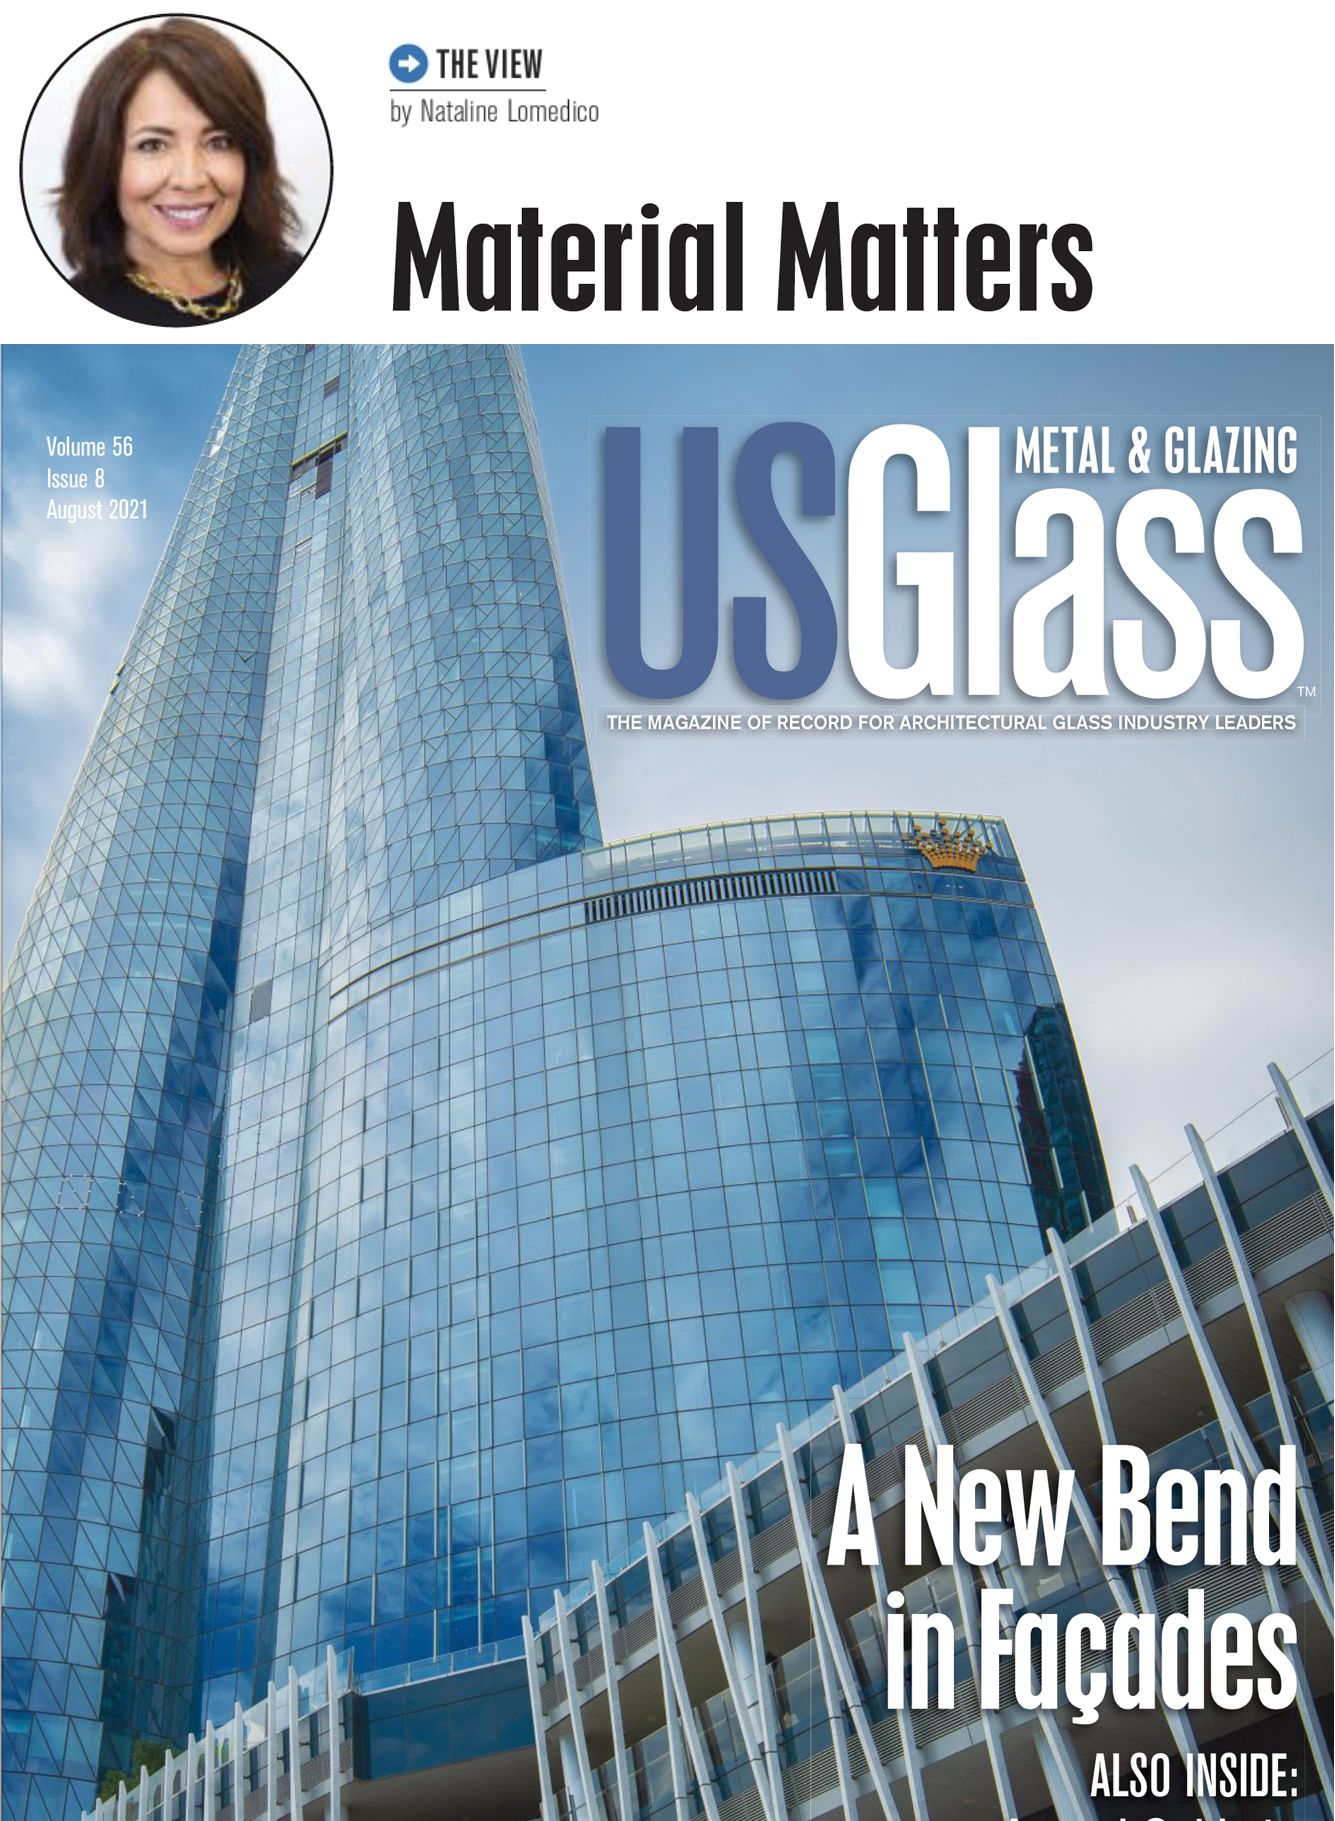 US Glass: Material Matters – The View by Nataline Lomedico